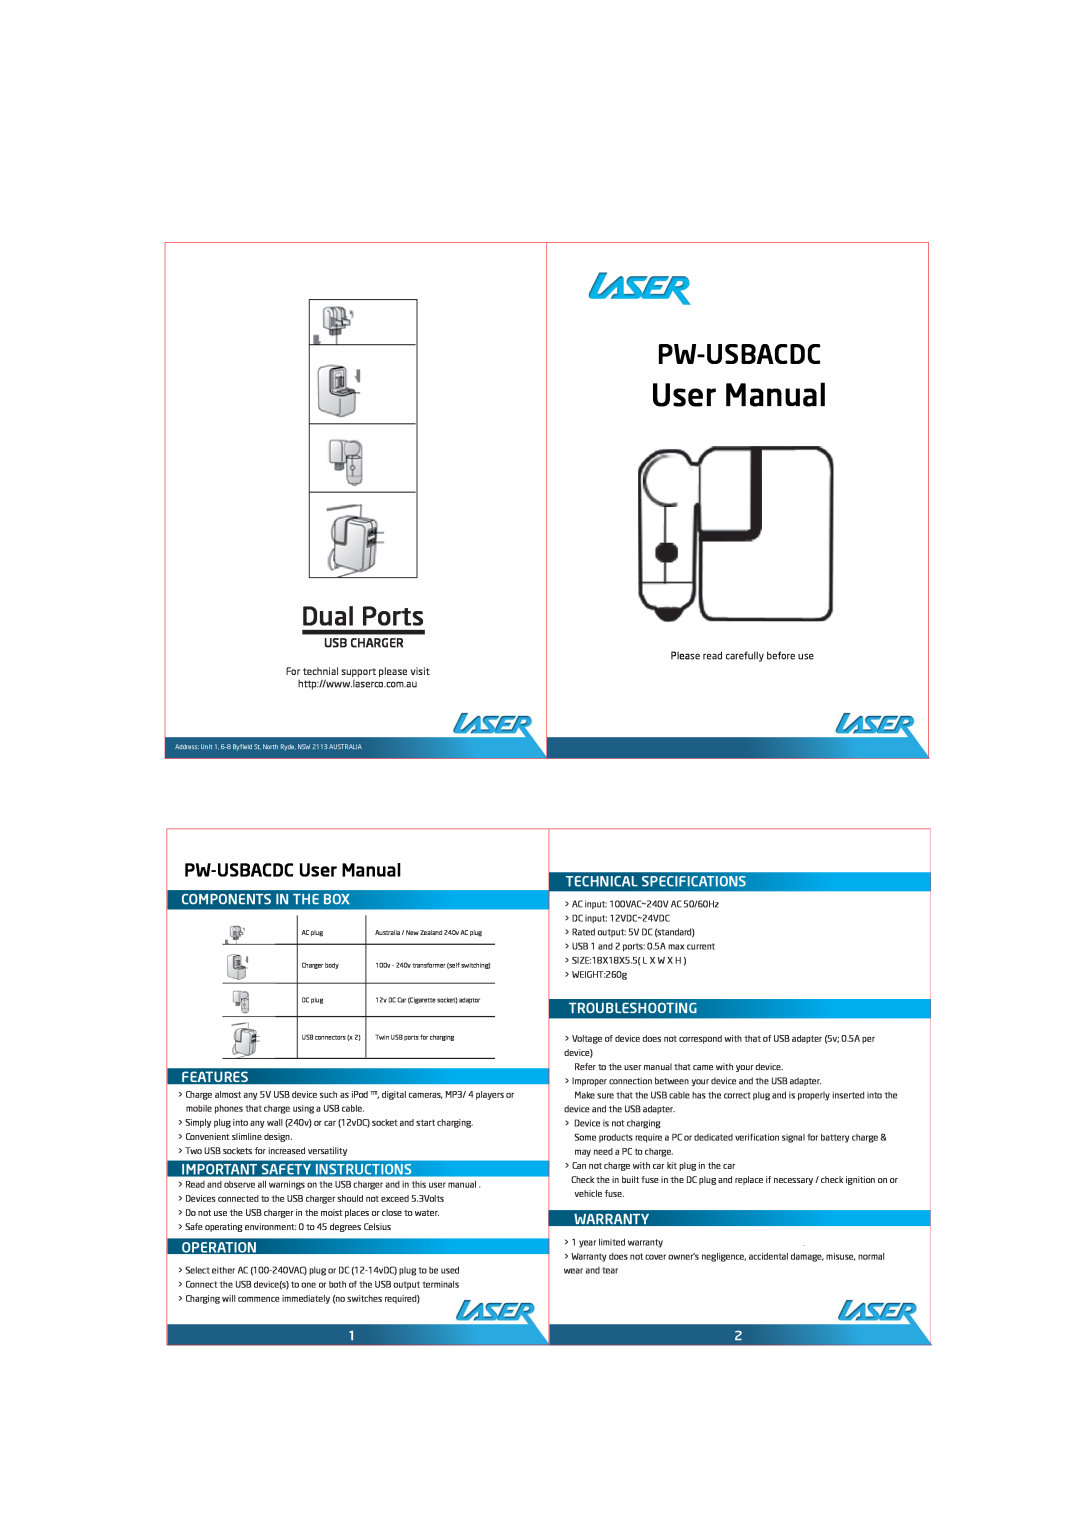 Laser user manual Pw-Usbacdc, Dual Ports, PW-USBACDC User Manual, Components In The Box, Features, Operation 